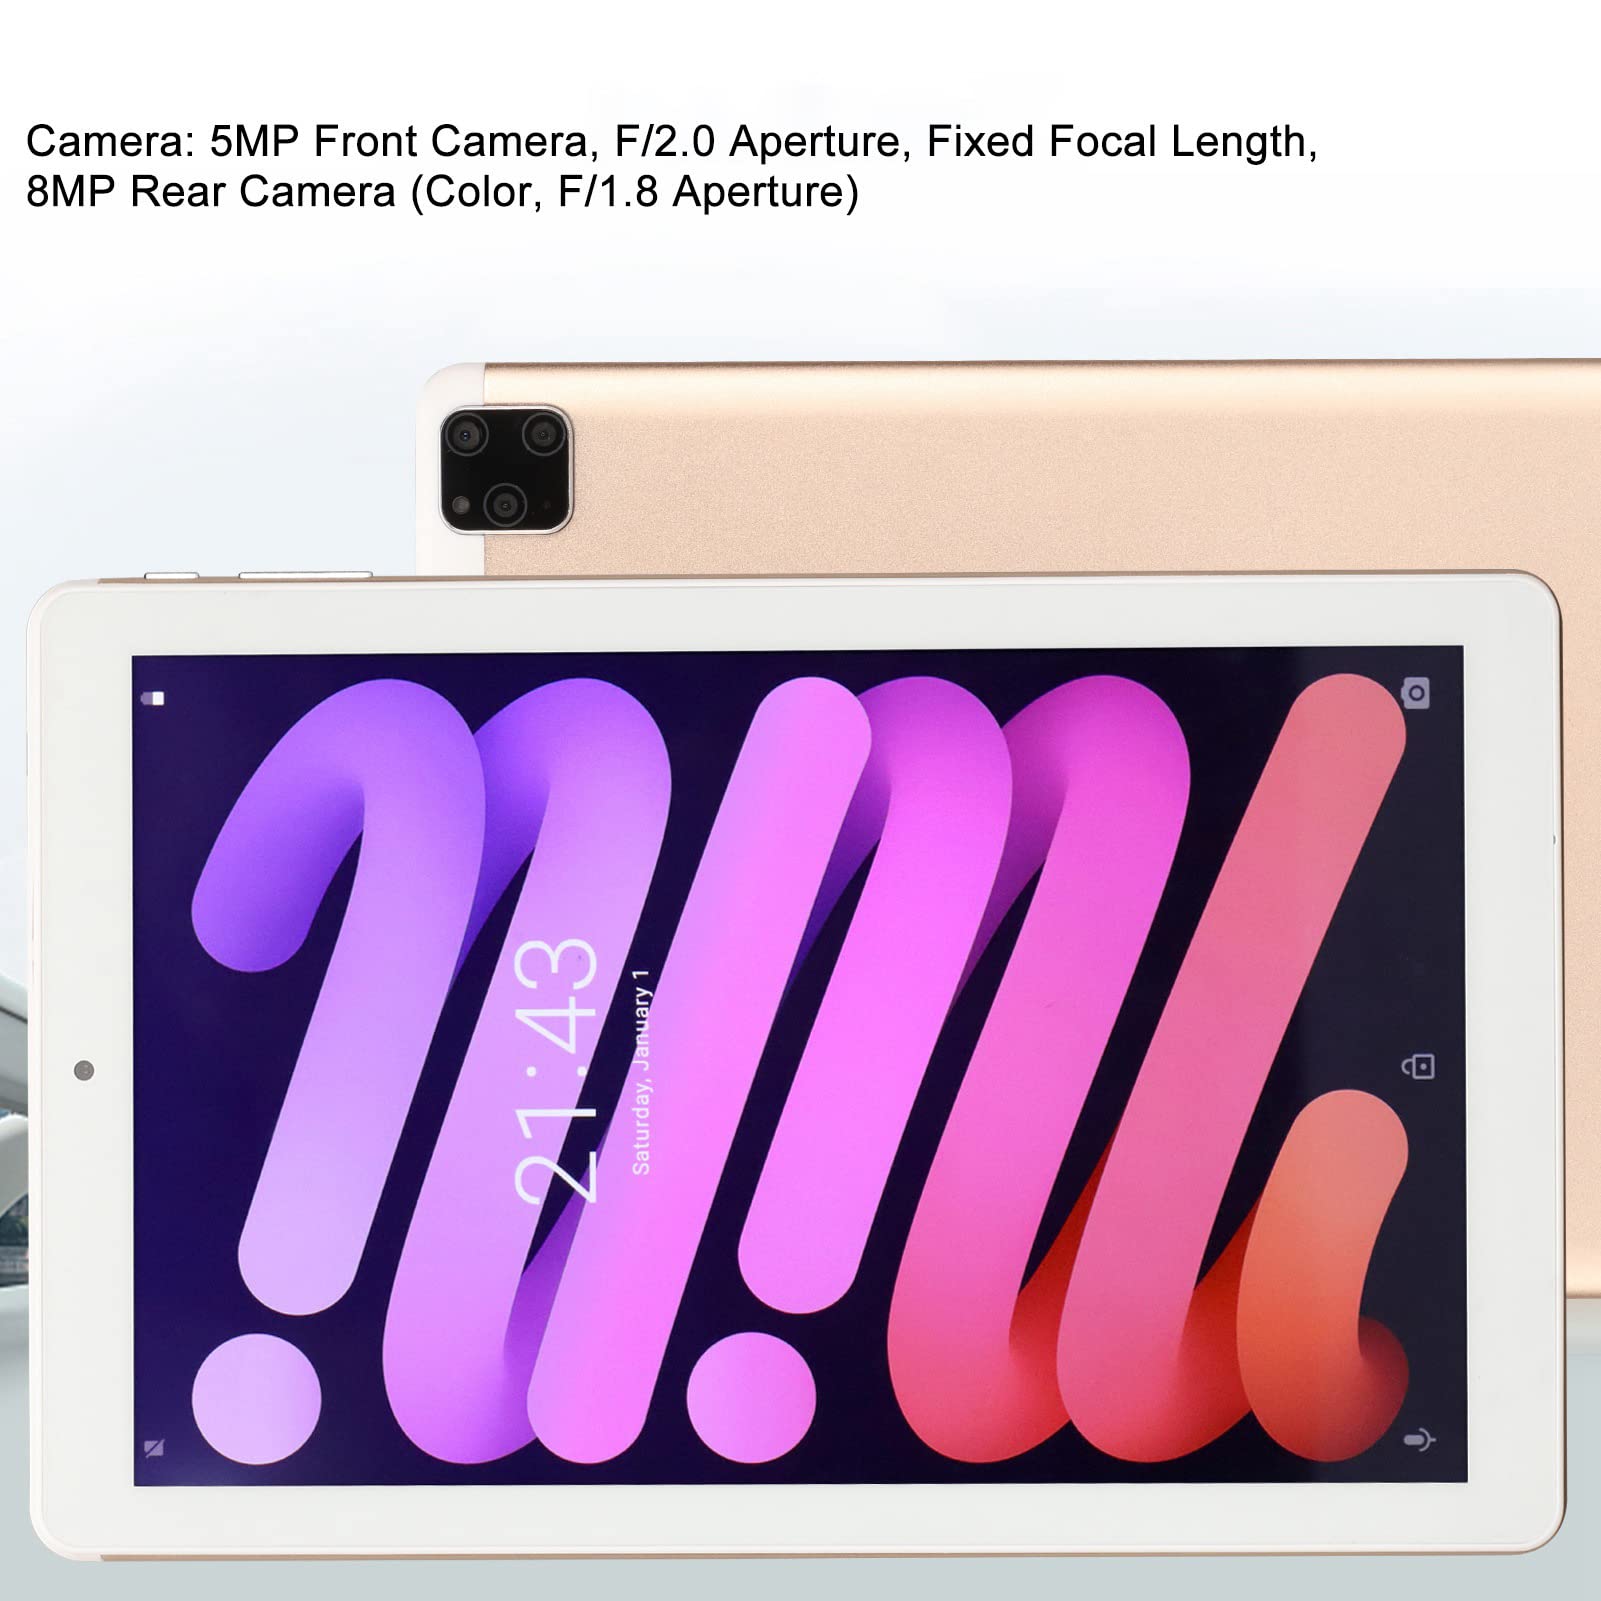 10 Inch Tablet, Android11 System 4G RAM 256G ROM Support WiFi 3G Networks Gold Tablet for Android 11 for Study, Watch Videos, Read Books